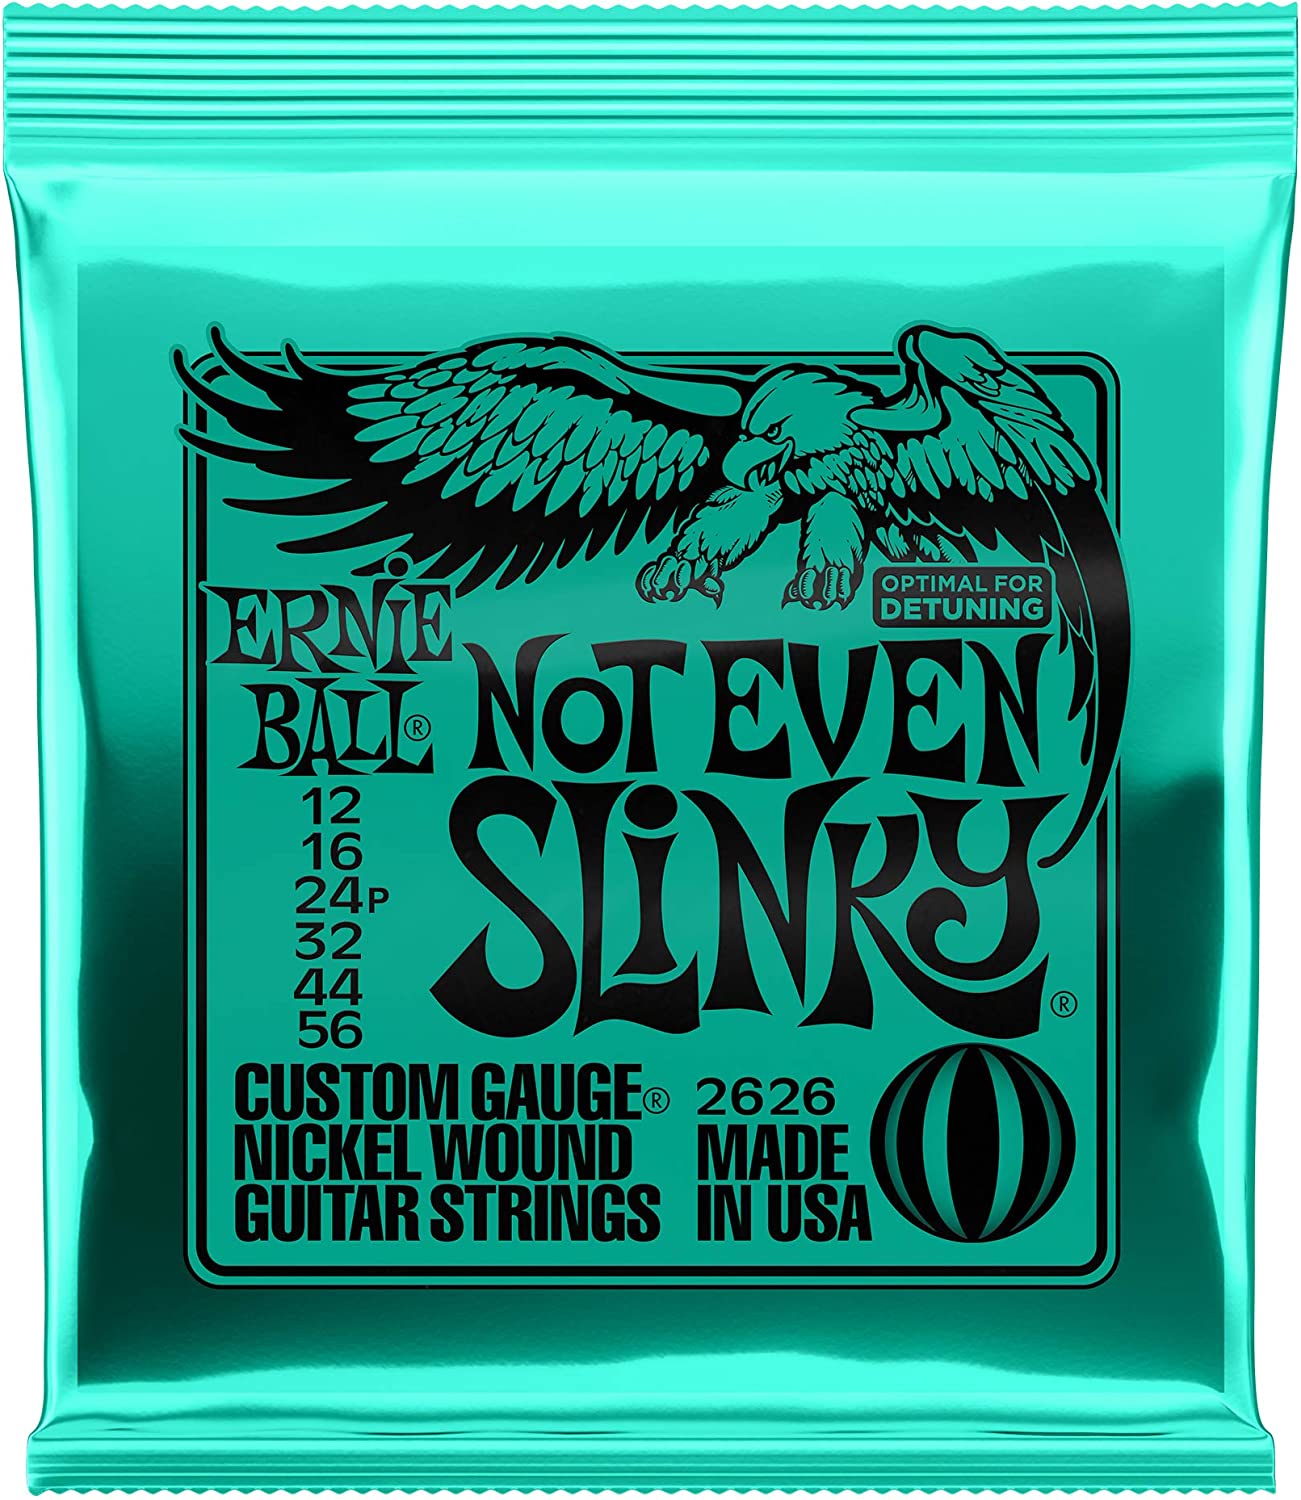 Ernie Ball Not Even Slinky Nickel Wound Guitar Strings on a white background